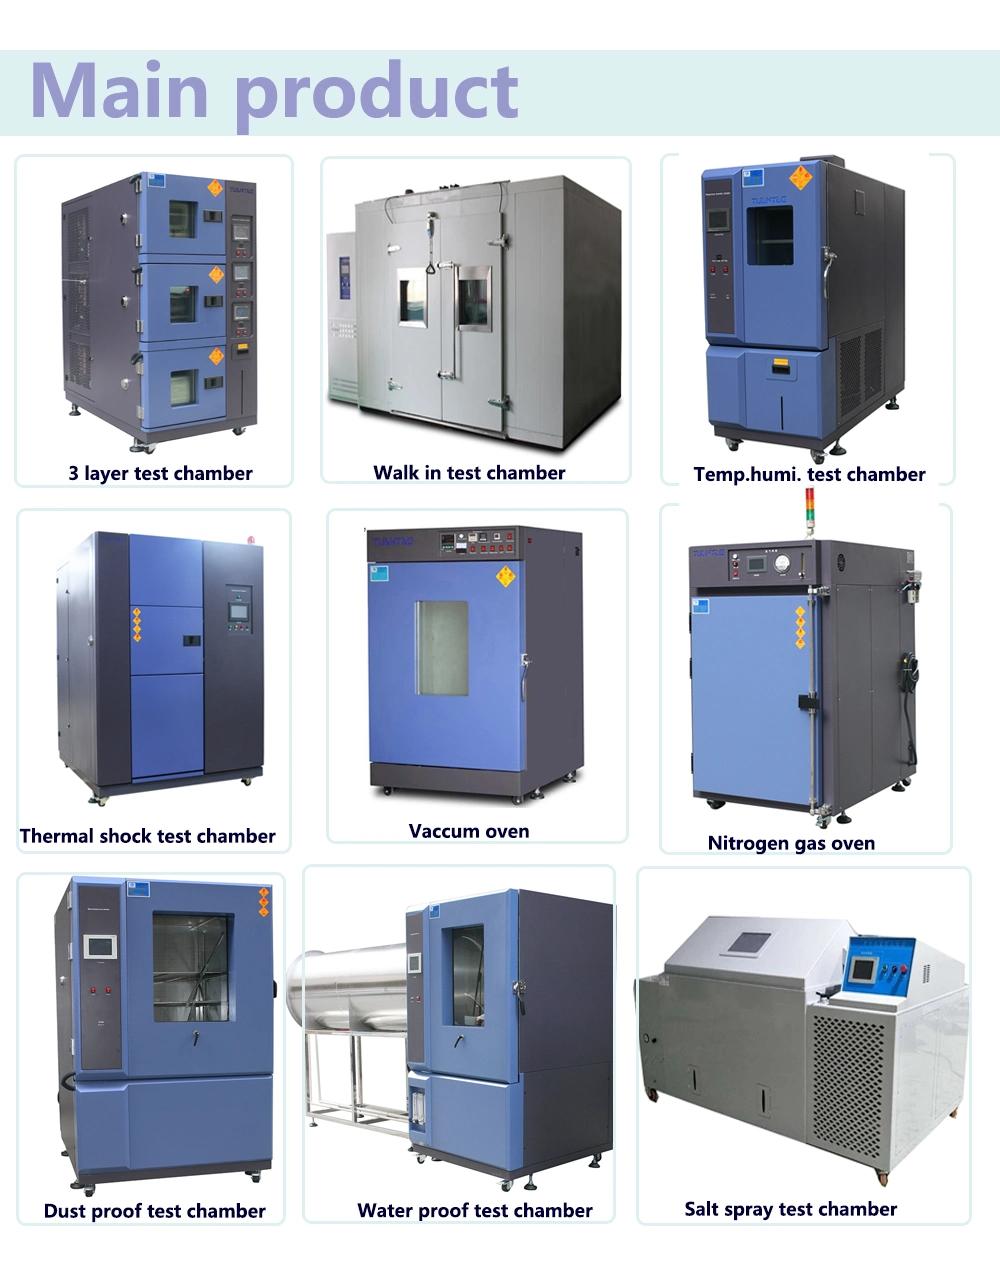 Acclerated Air Ventilation Aging Oven for Plasticized Product Testing